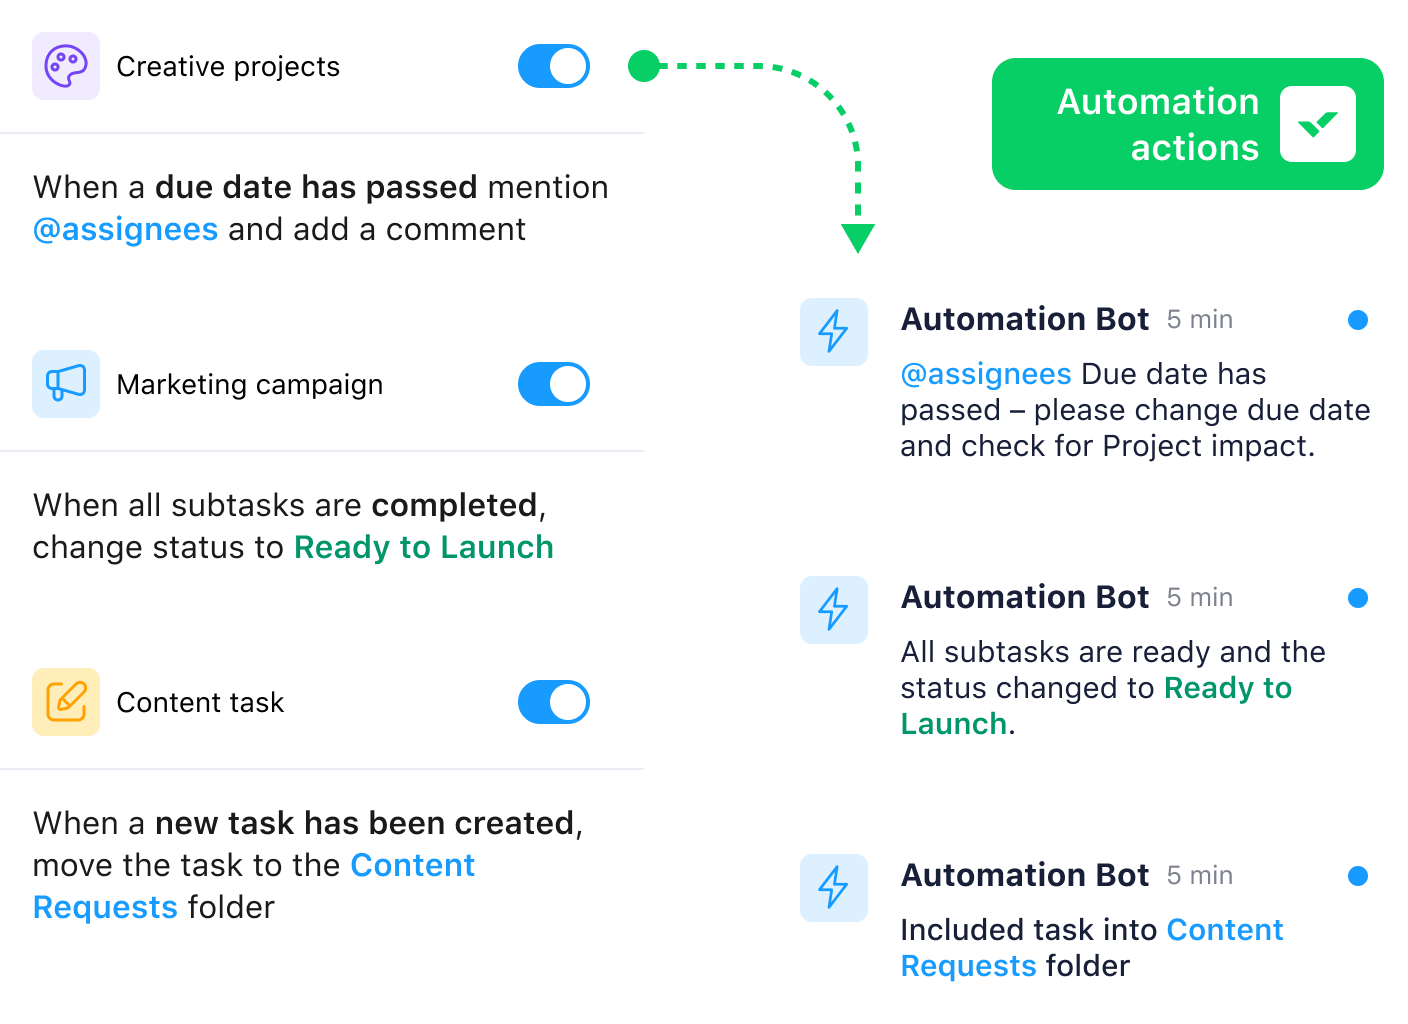 wrike product screenshot of automation actions